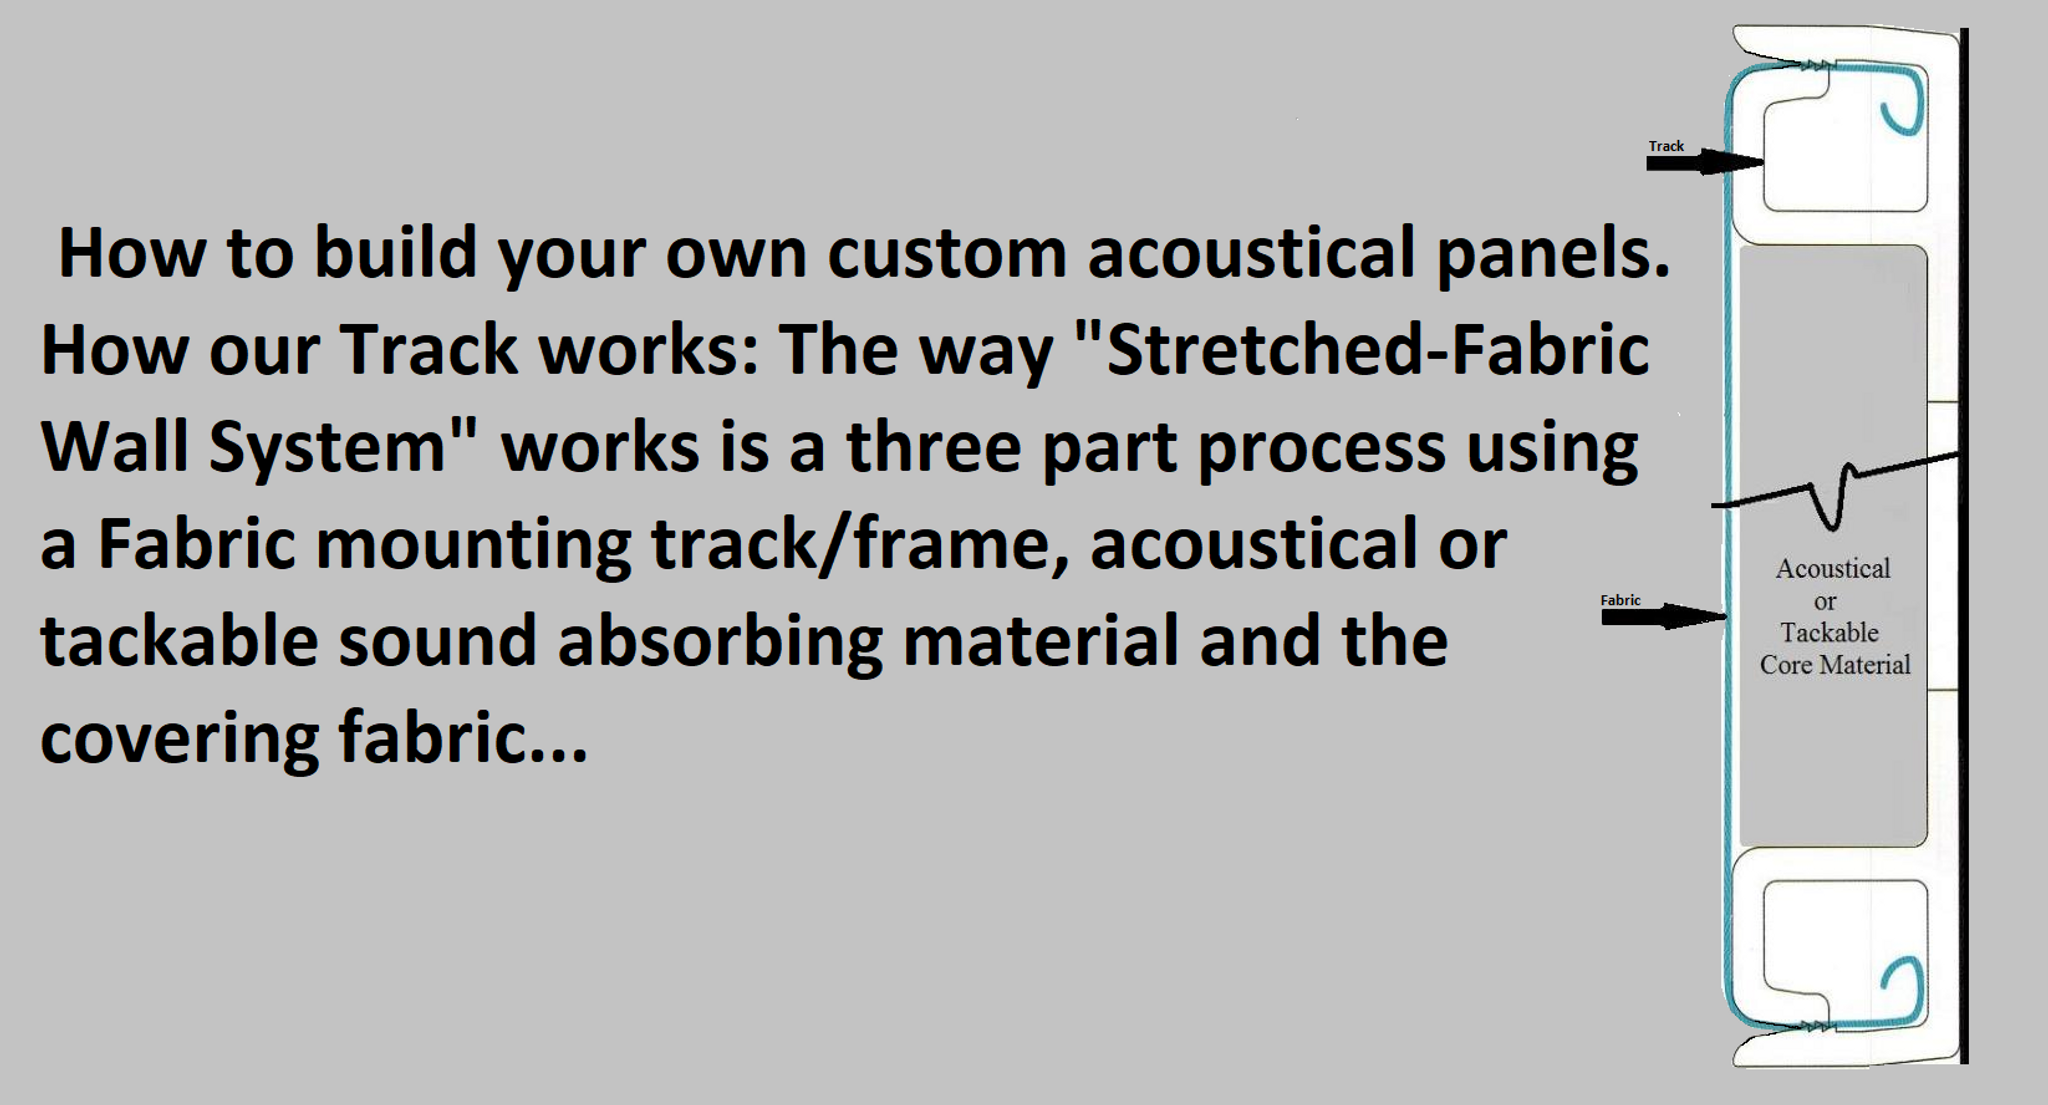 Installing Fabric-Wrapped Acoustic Panels